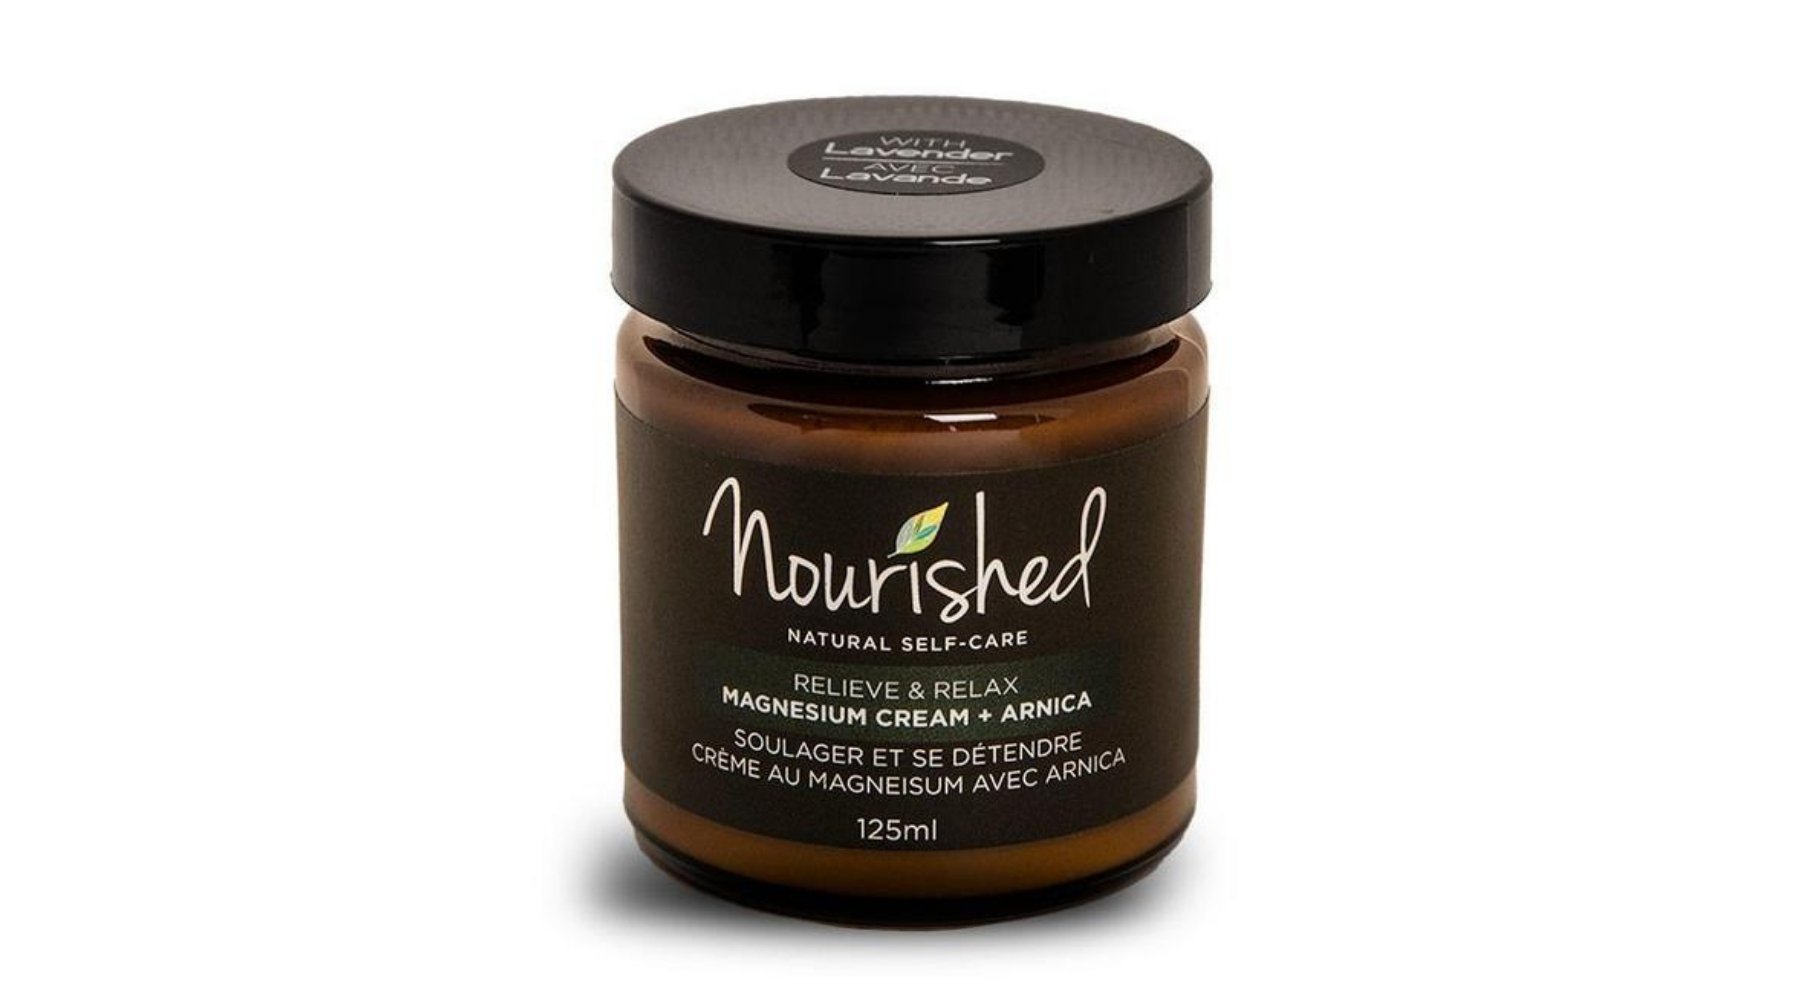 I Tried Out Nourished Magnesium for a Specific Ailment | Naturally Canada